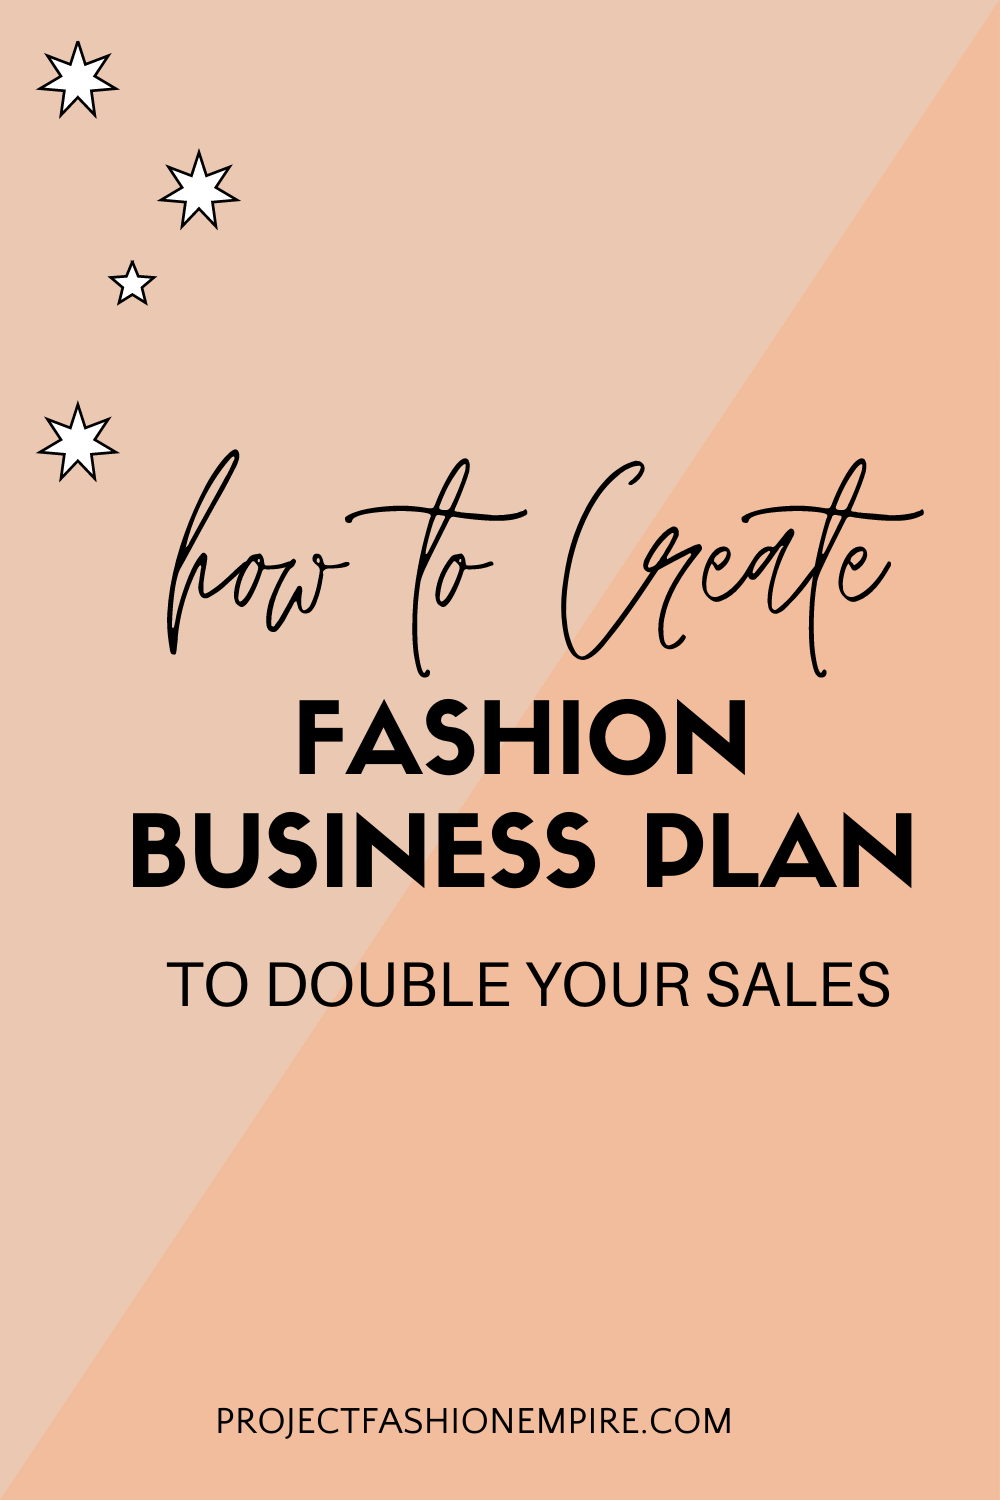 Fashion business plan to audit your fashion business and fashion marketing plan to get consistent sales this year in your fashion brand